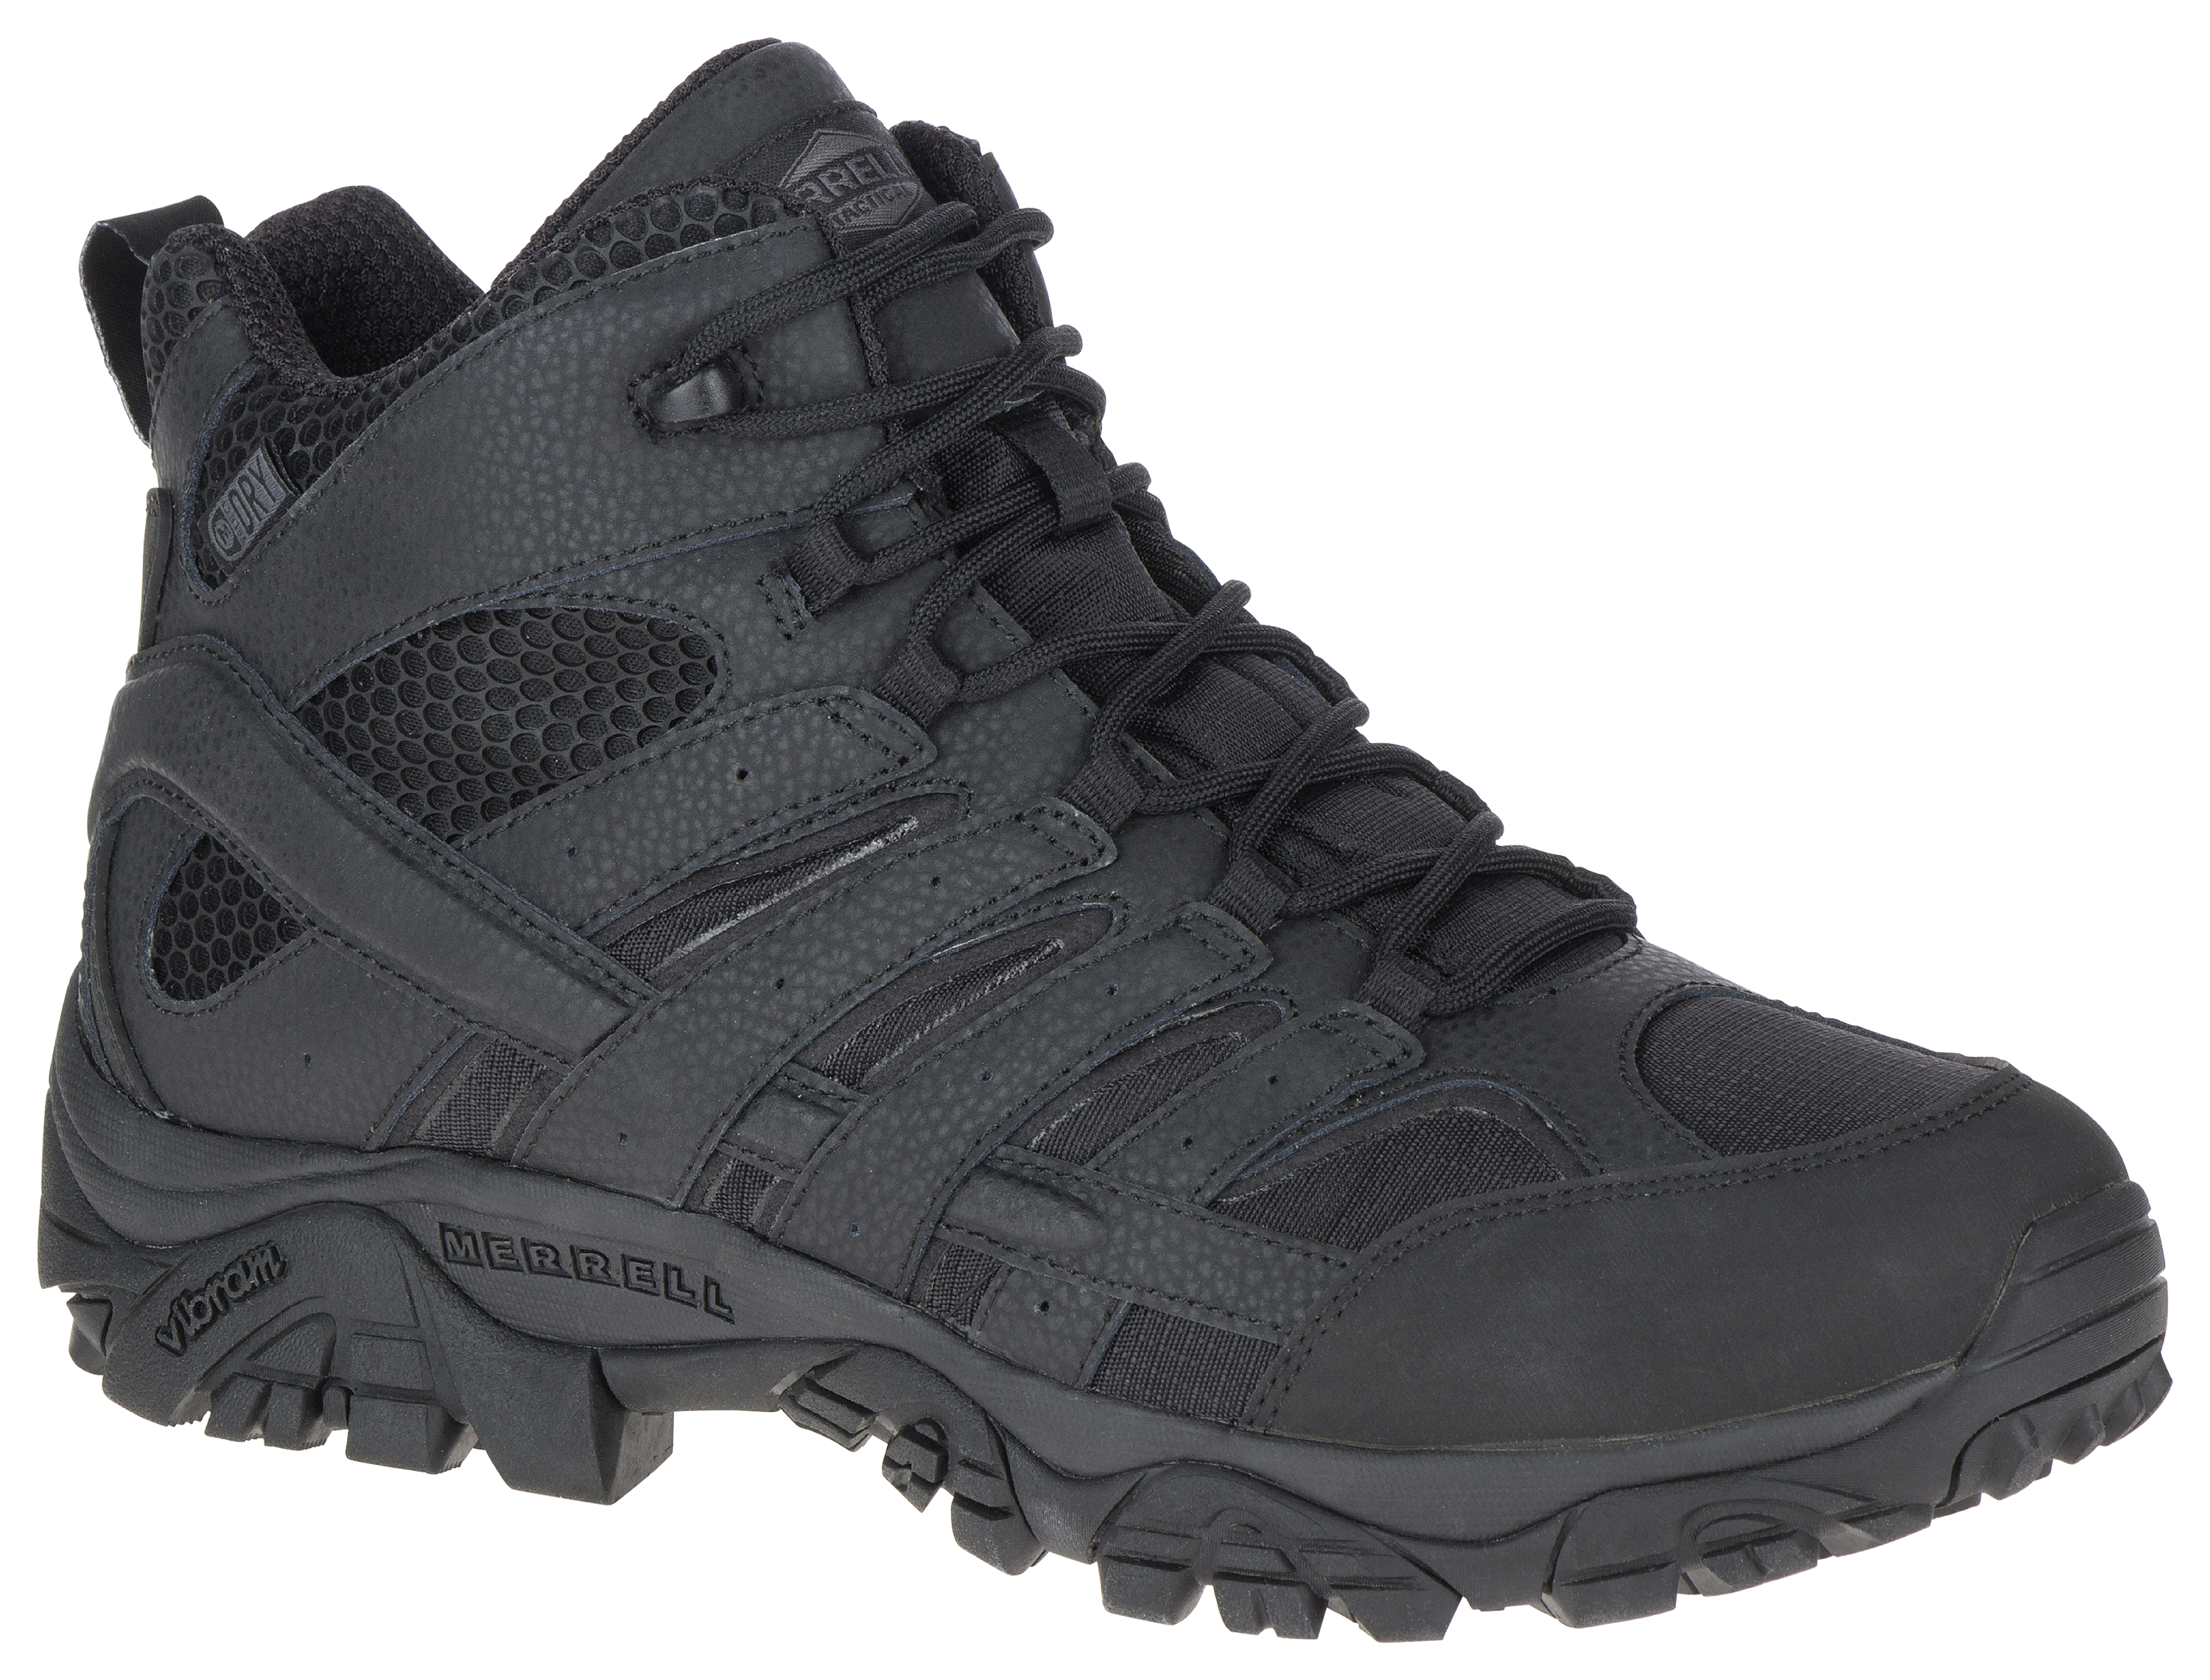 Merrell Moab 2 Mid Tactical Waterproof Duty Boots for Men | Pro